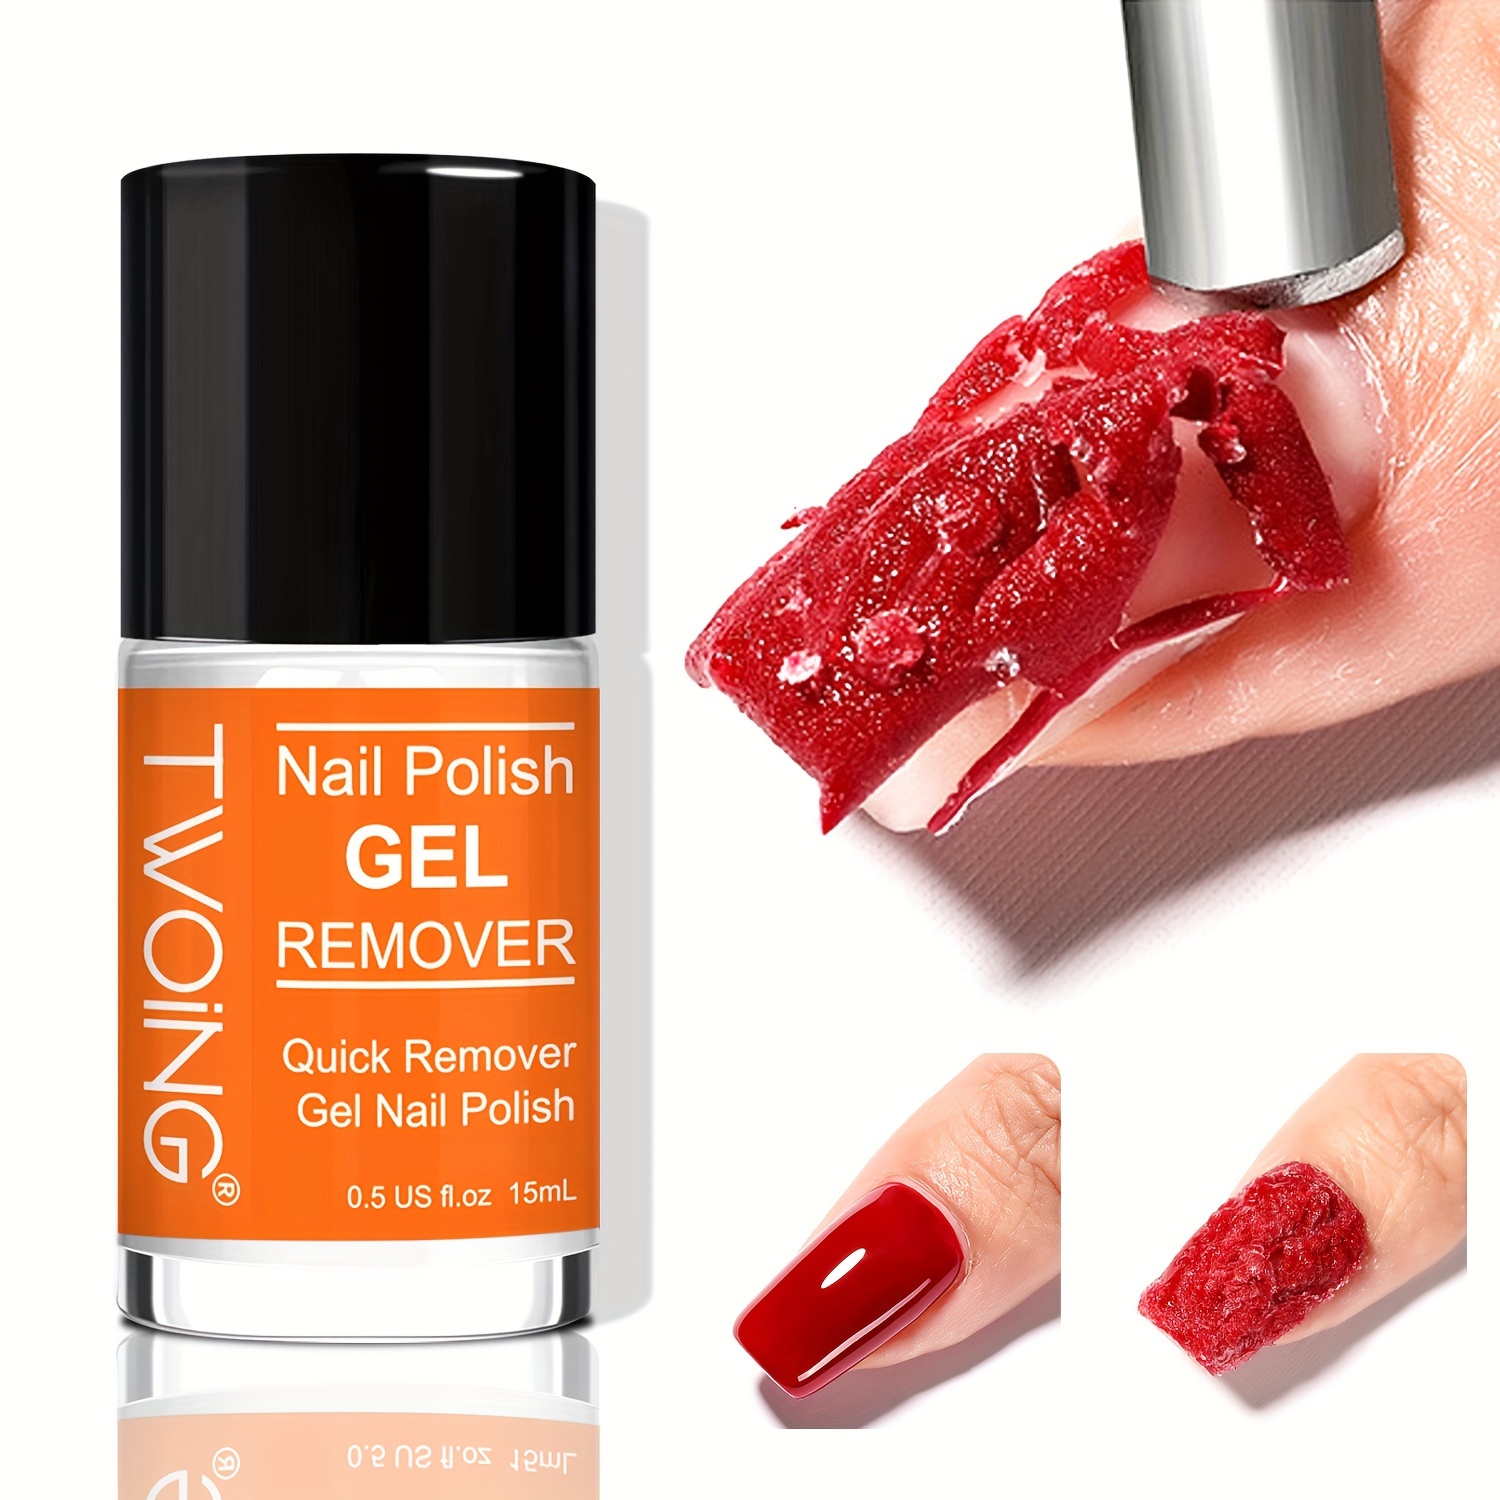 

Gel Nail Polish Remover, Quick & Easy Polish Remover In 2-3 Minutes, No Need Soaking Or Wrapping - 15ml